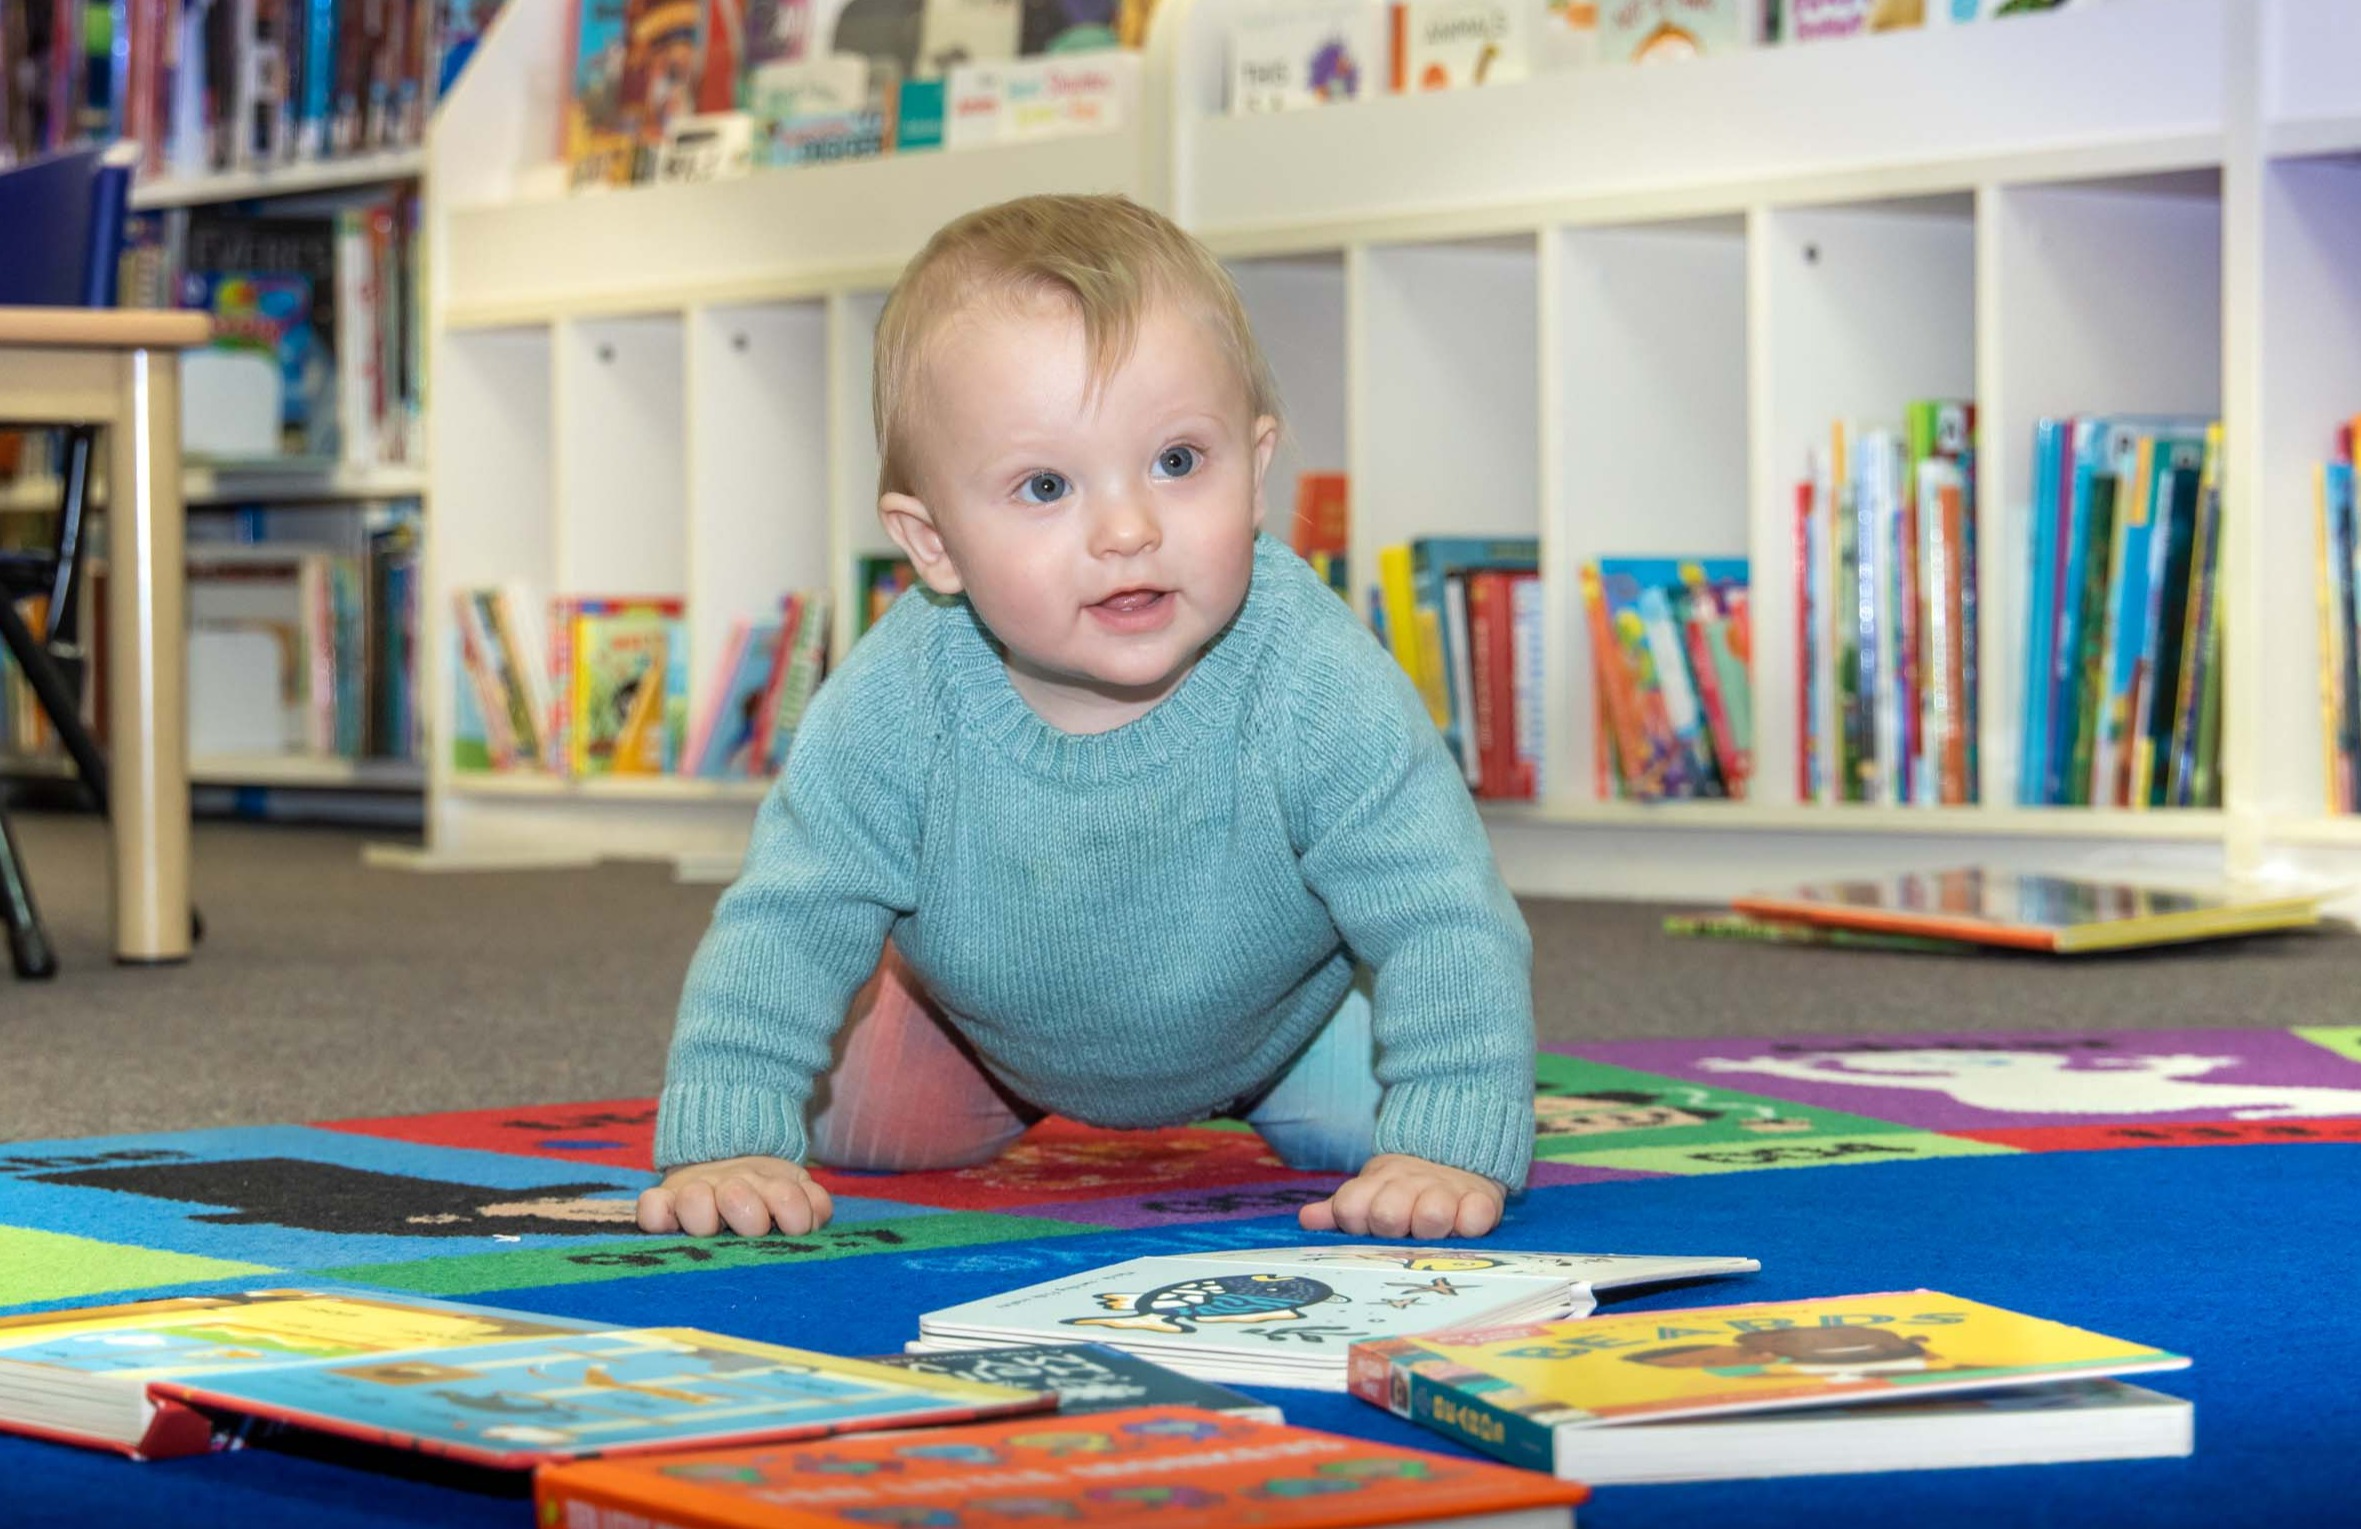 Rhymetime is held at Sylvania Library on Tuesday mornings at 11am during school terms. Suitable for babies aged 0 to 24 months.